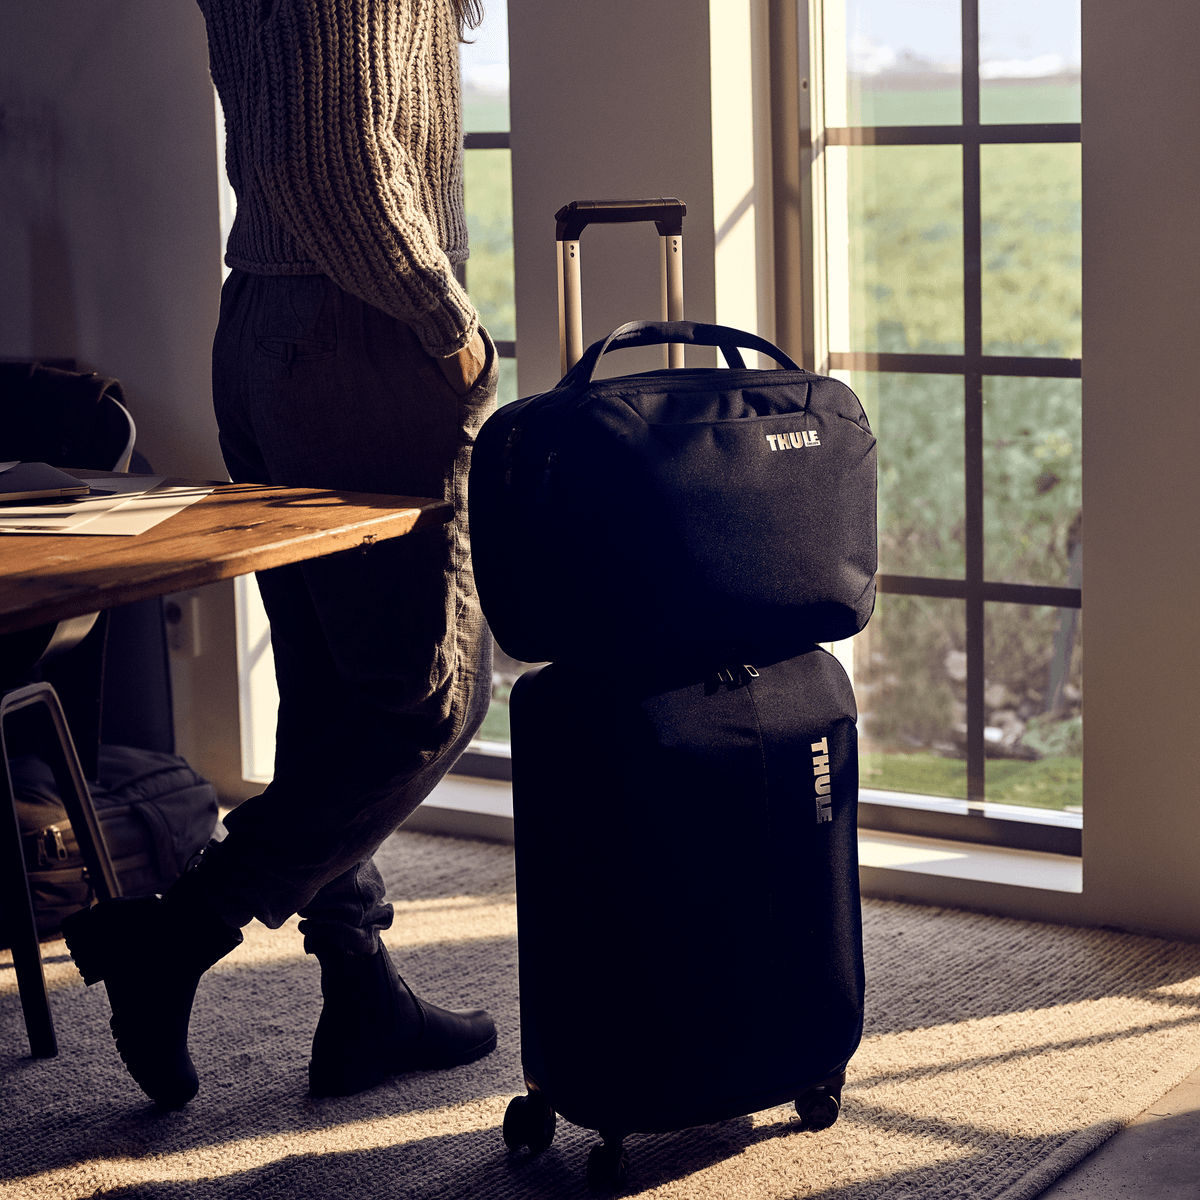 A woman looks outside a window at the sunshine with backpack on her Thule Subterra Carry-On Spinner suitcase.